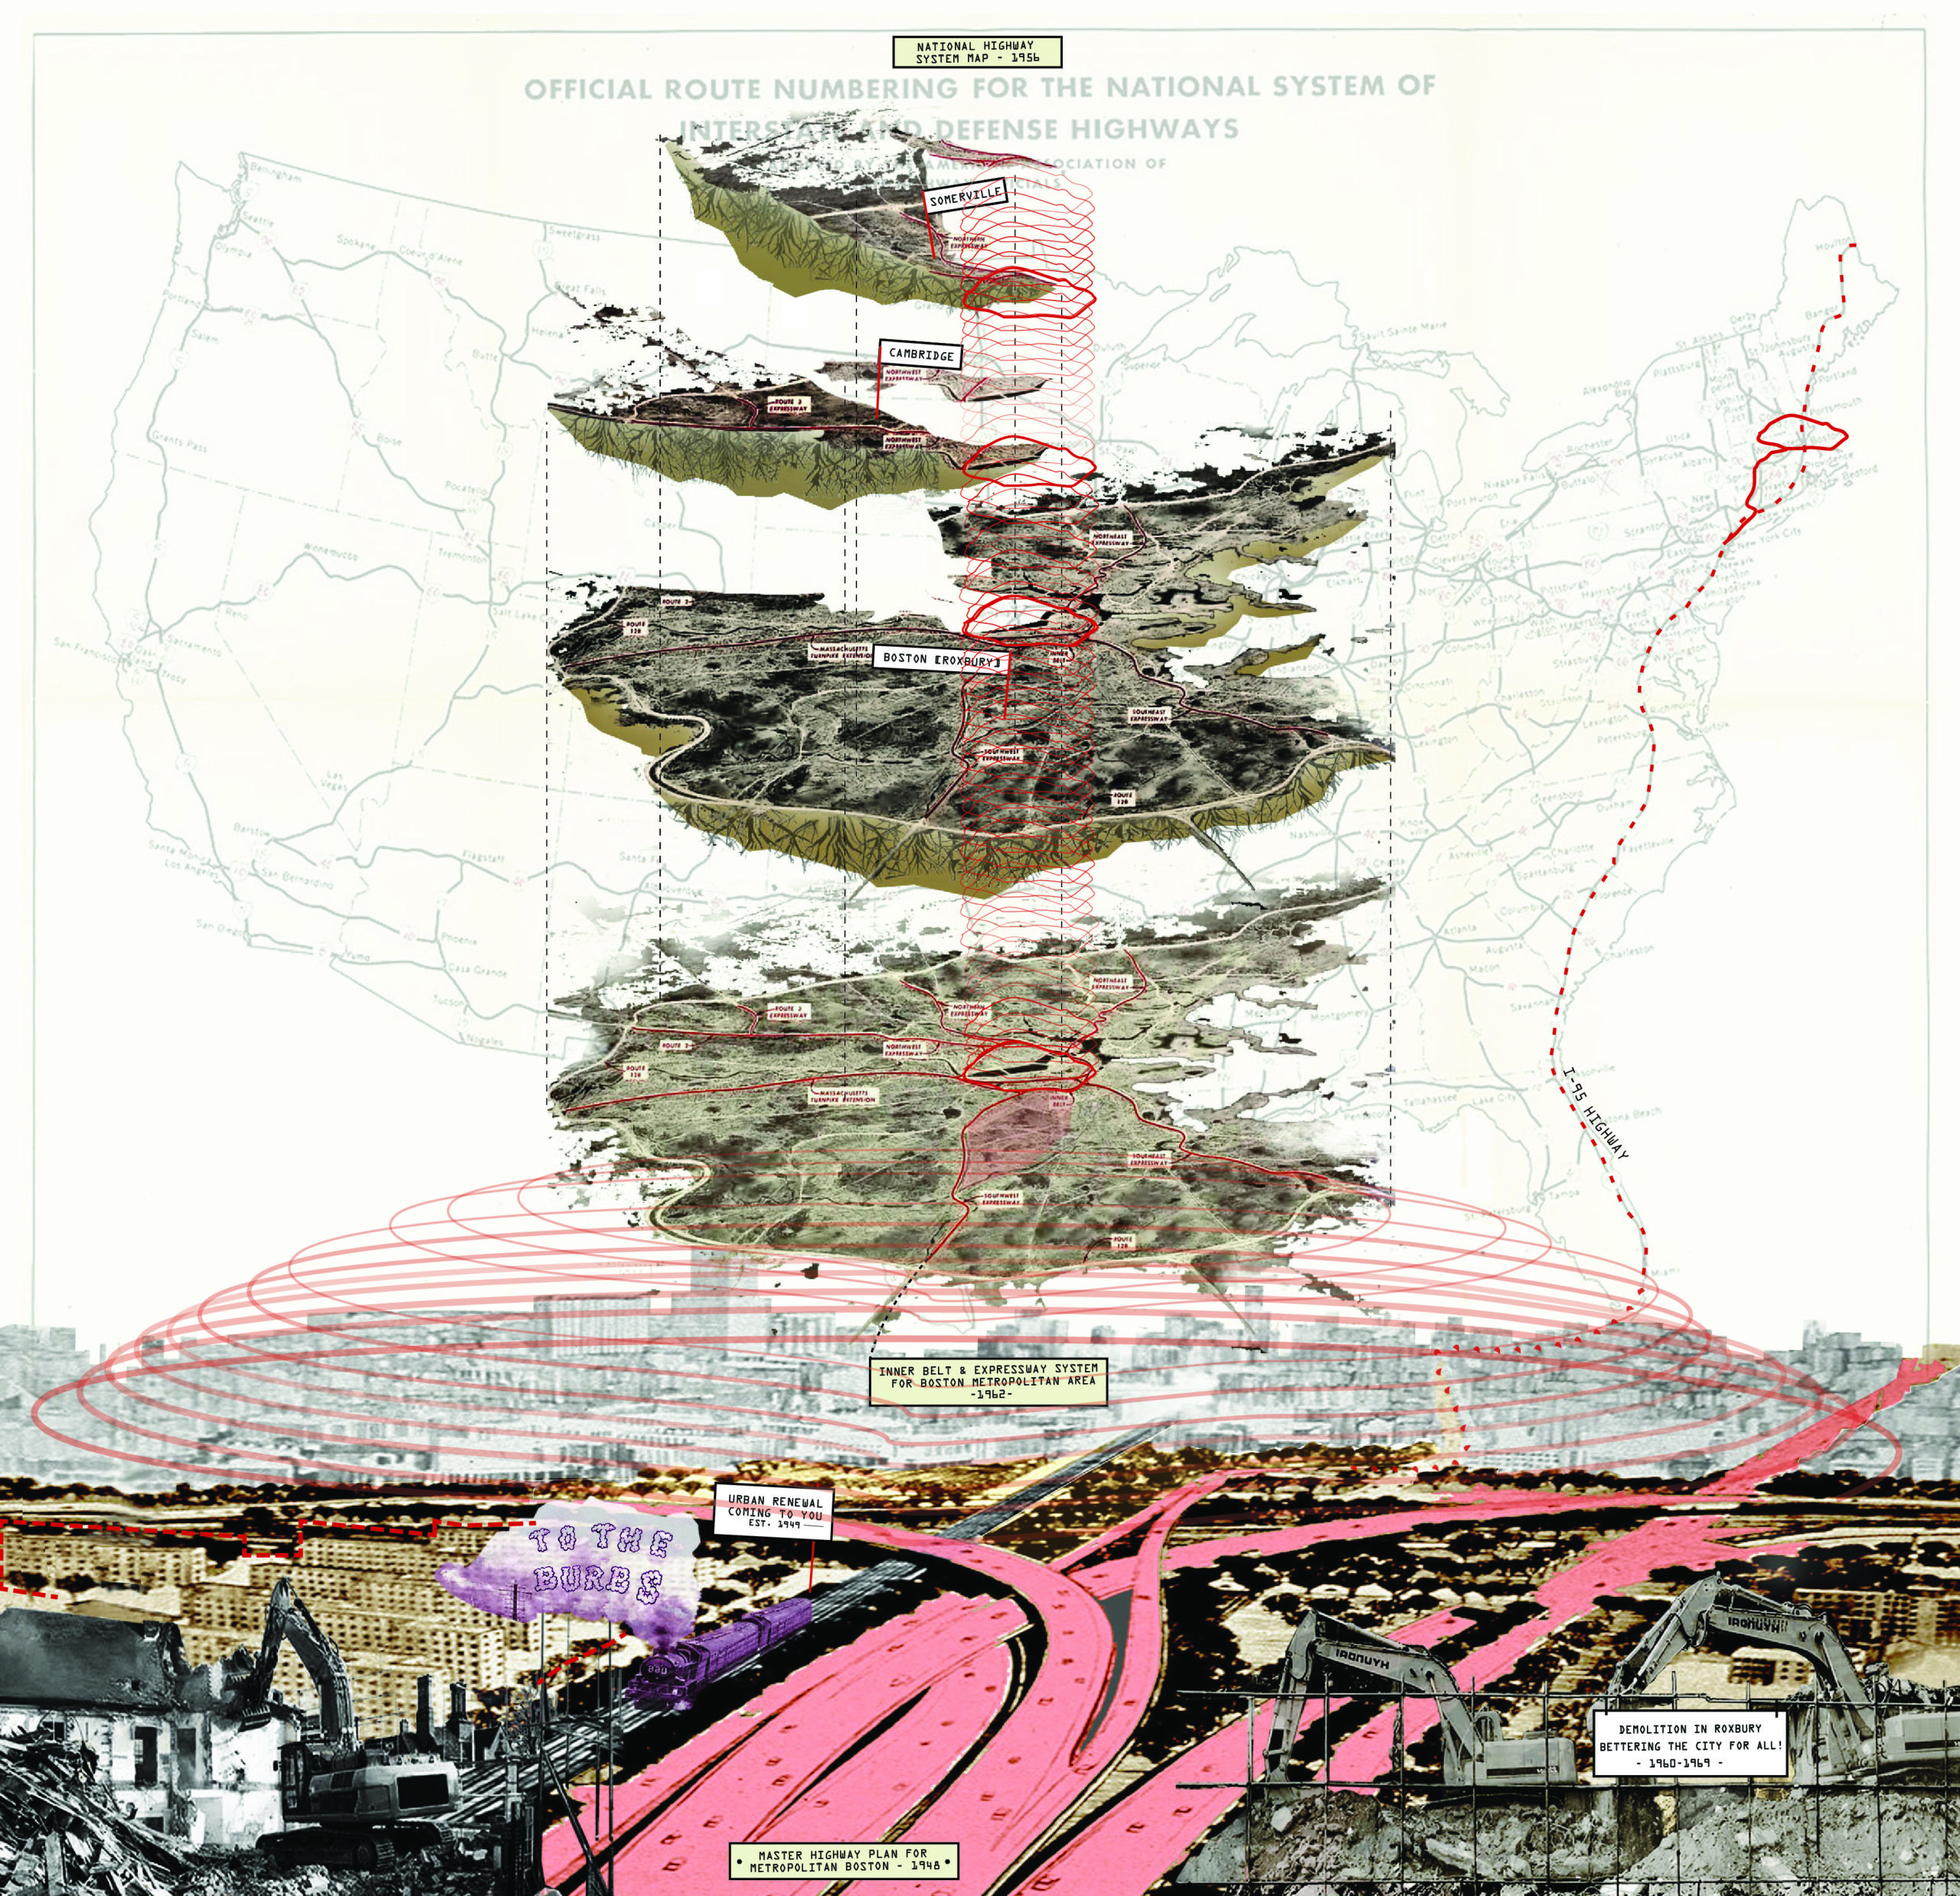 A collage analyzing highway networks in Boston and along the east coast of the United States